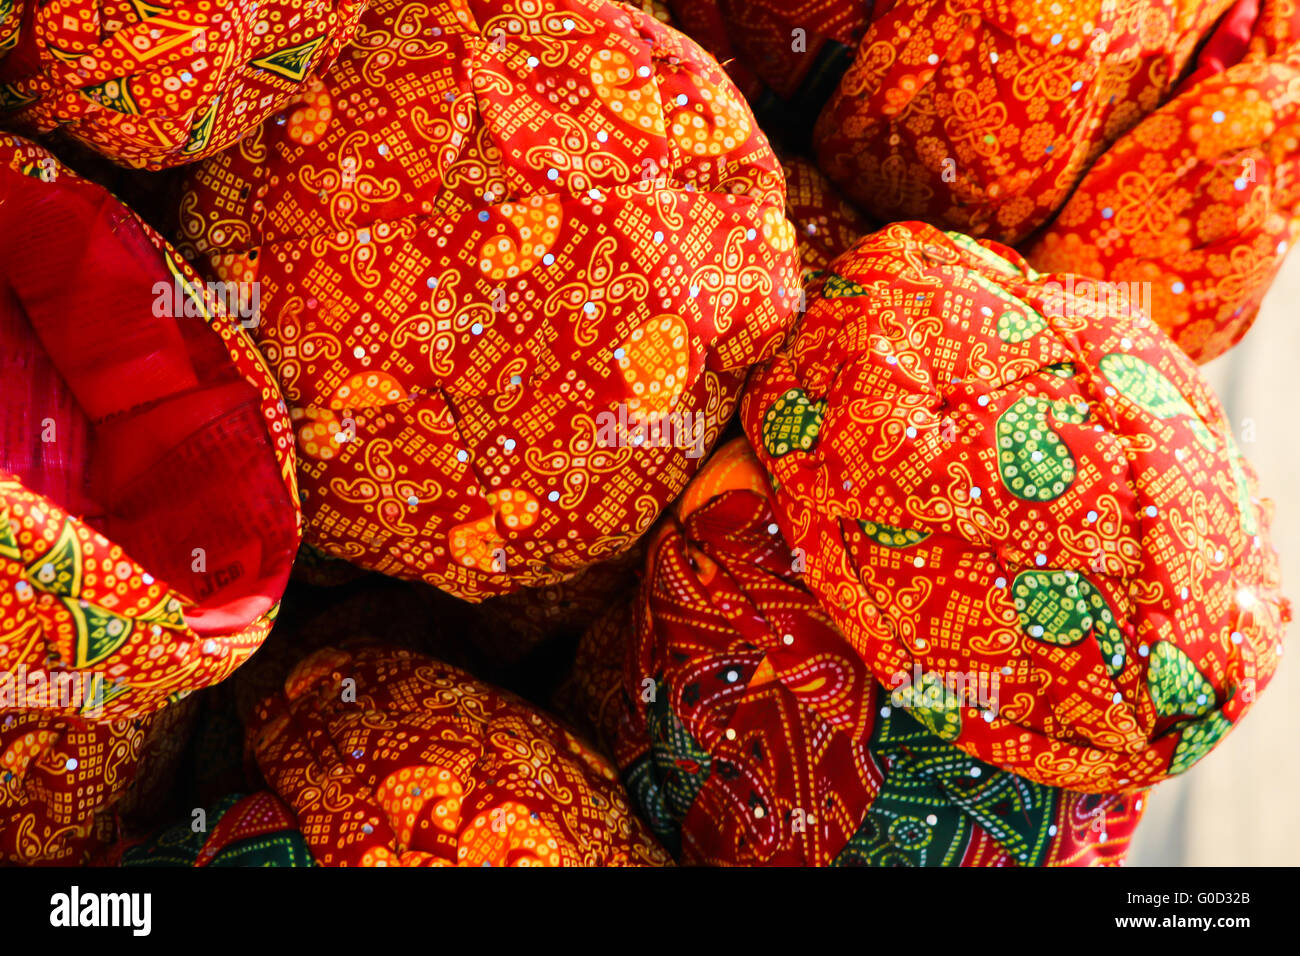 rajasthan turbans for sale Stock Photo